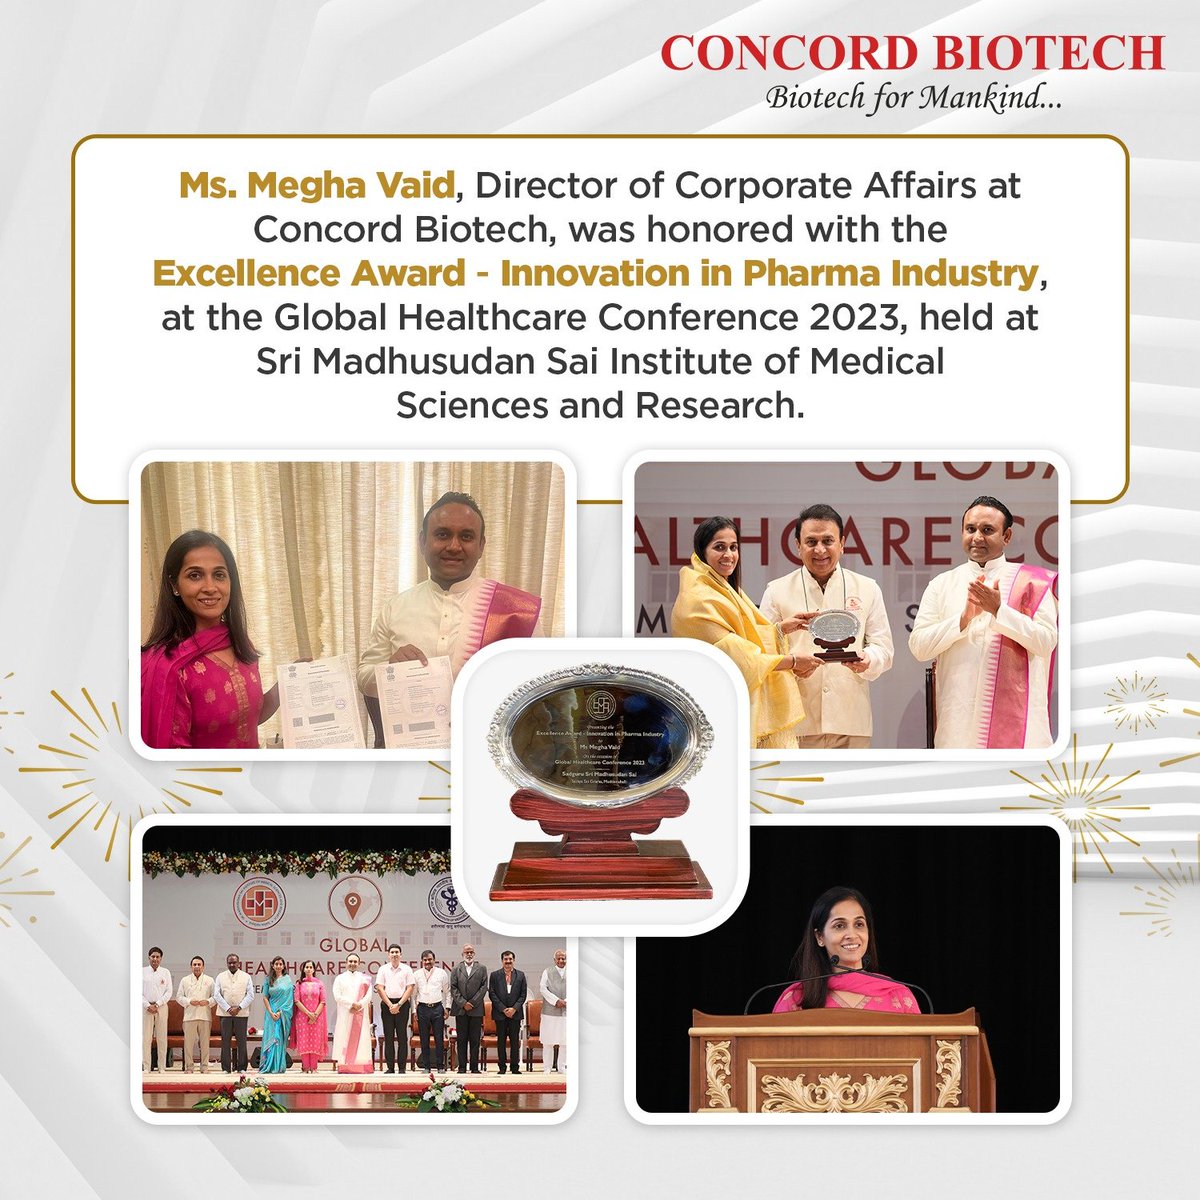 Ms. Megha Vaid, Director of Corporate Affairs at Concord Biotech, honored with the Excellence Award for Innovation in Pharma at the Global Healthcare Conference 2023, at Sri Madhusudan Sai Institute of Medical Sciences and Research. 

#SriMadhusudanSai #globalhealthconference